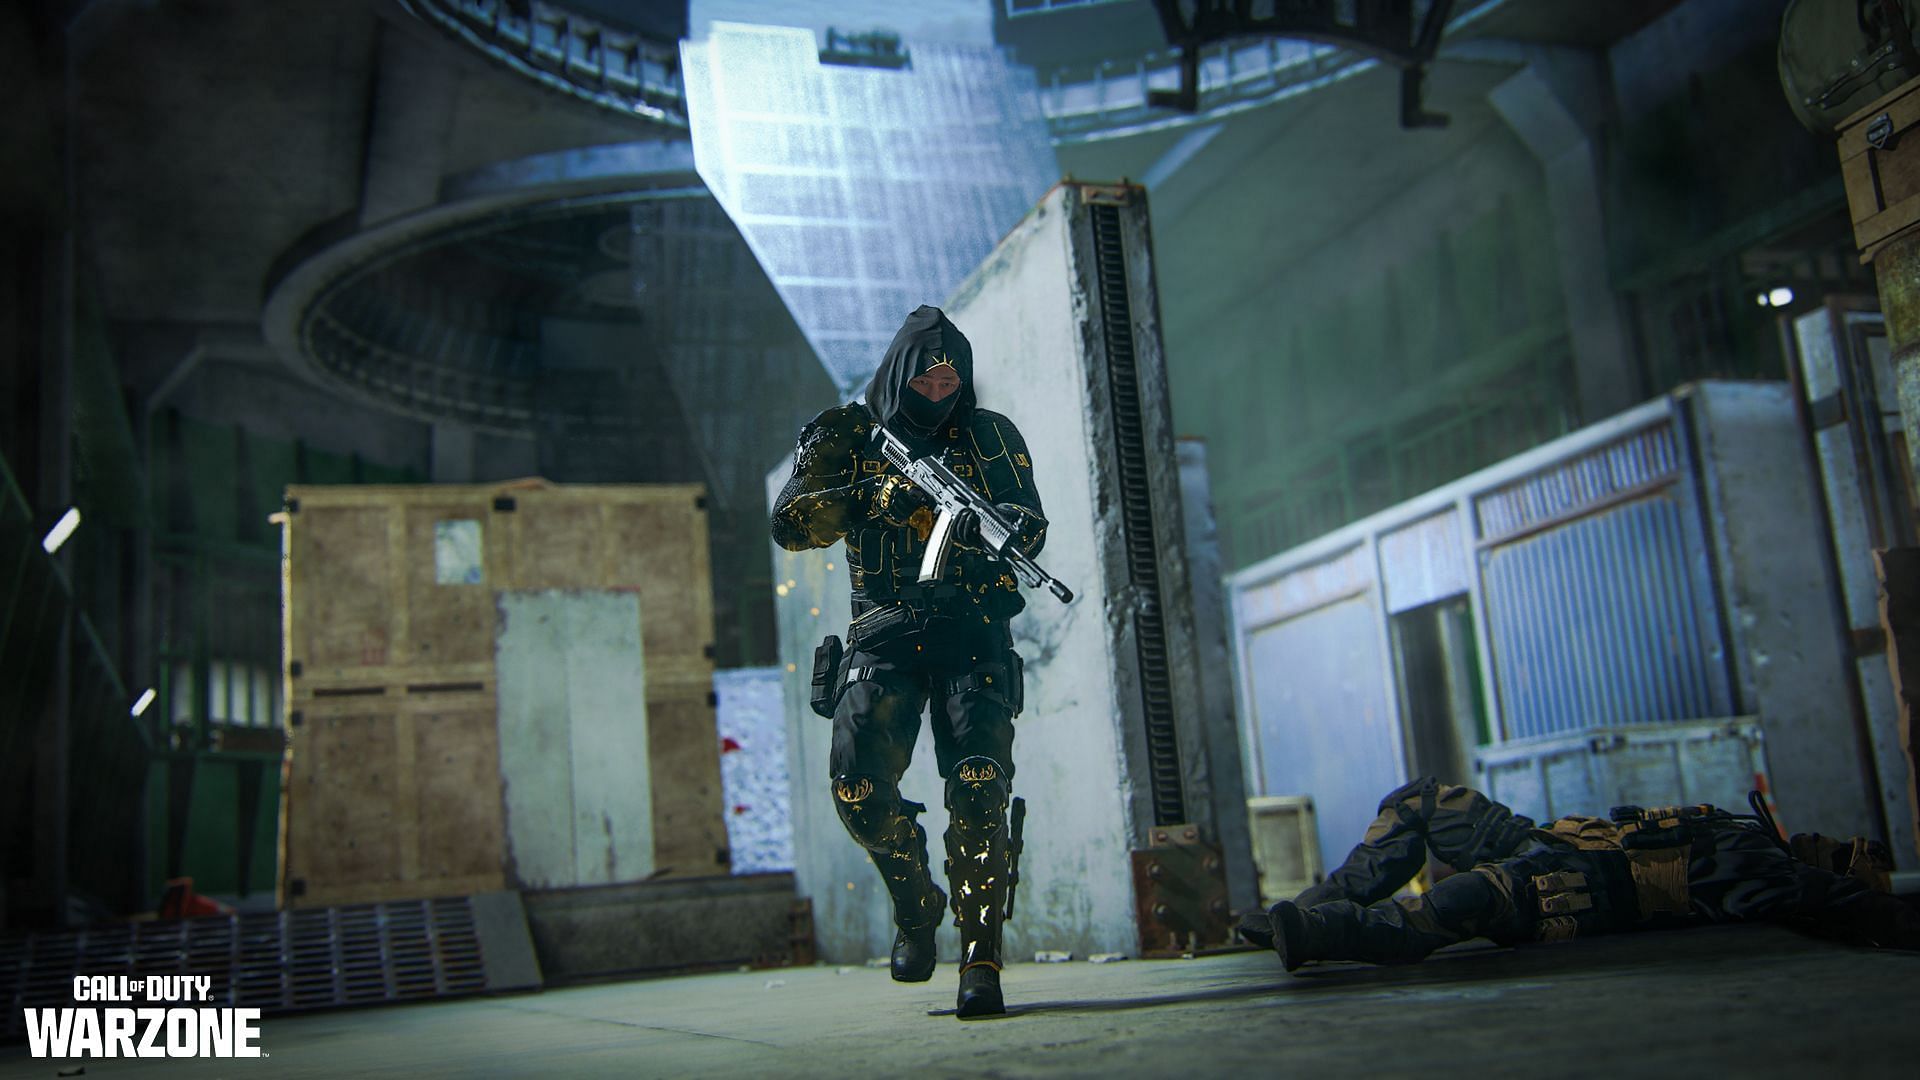 Player standing in Warzone